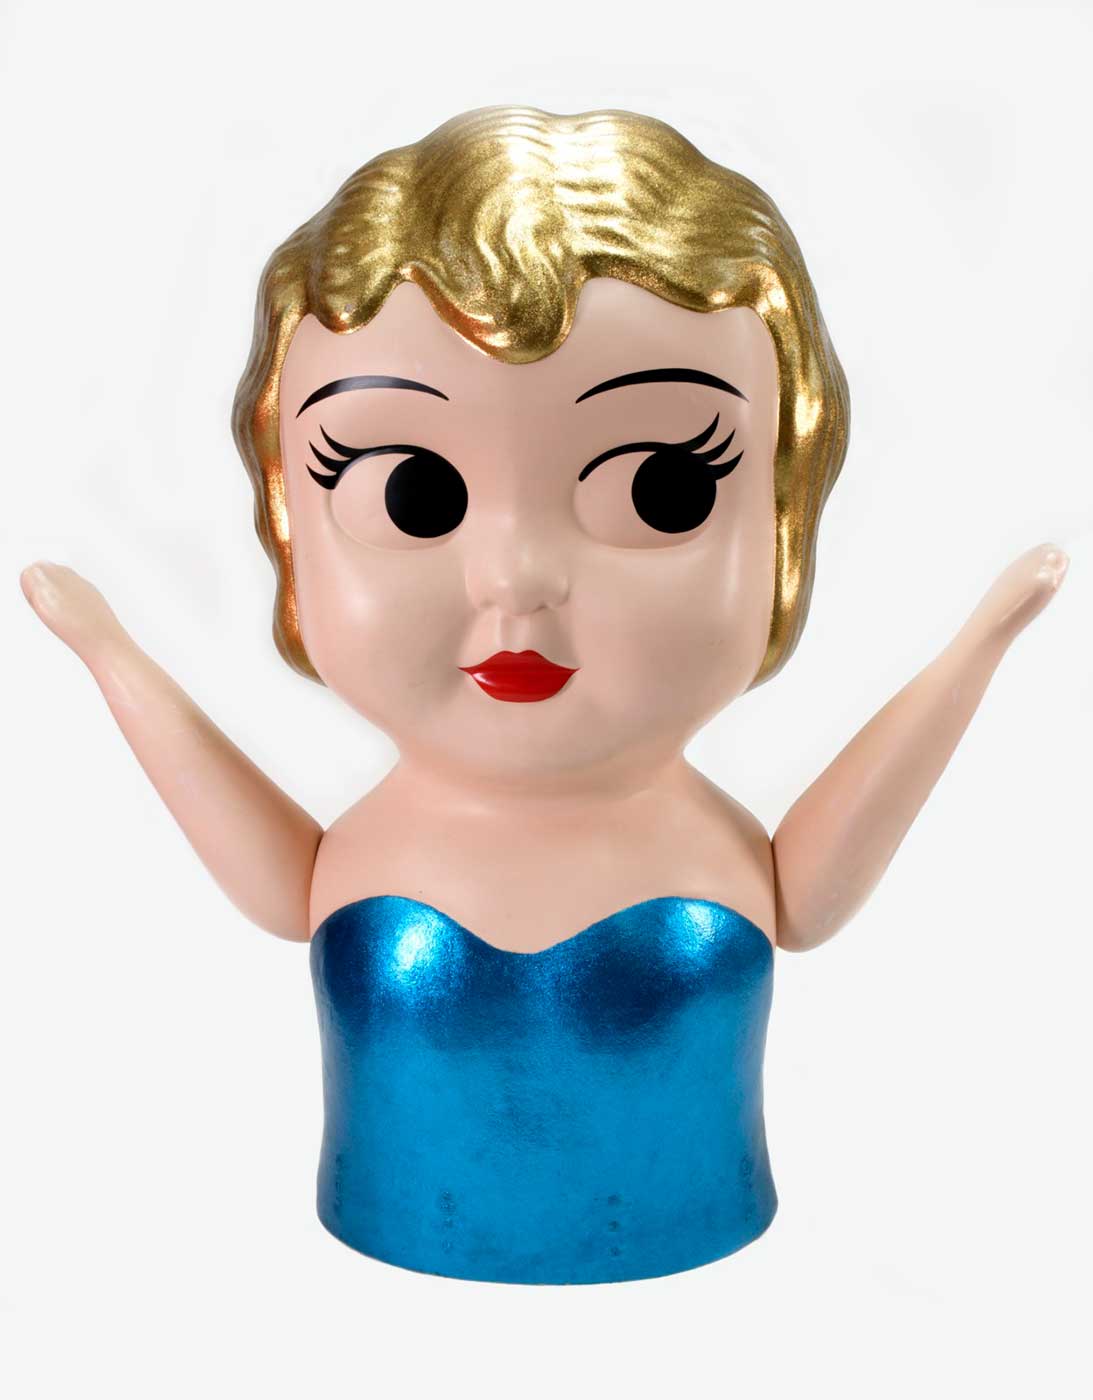 The head and torso of a large scale Kewpie doll performance prop. The head and torso are a single cast fibreglass piece, painted with pink skin, red lips, black eye details, glitter-gold hair, and a glitter-blue strapless dress. - click to view larger image